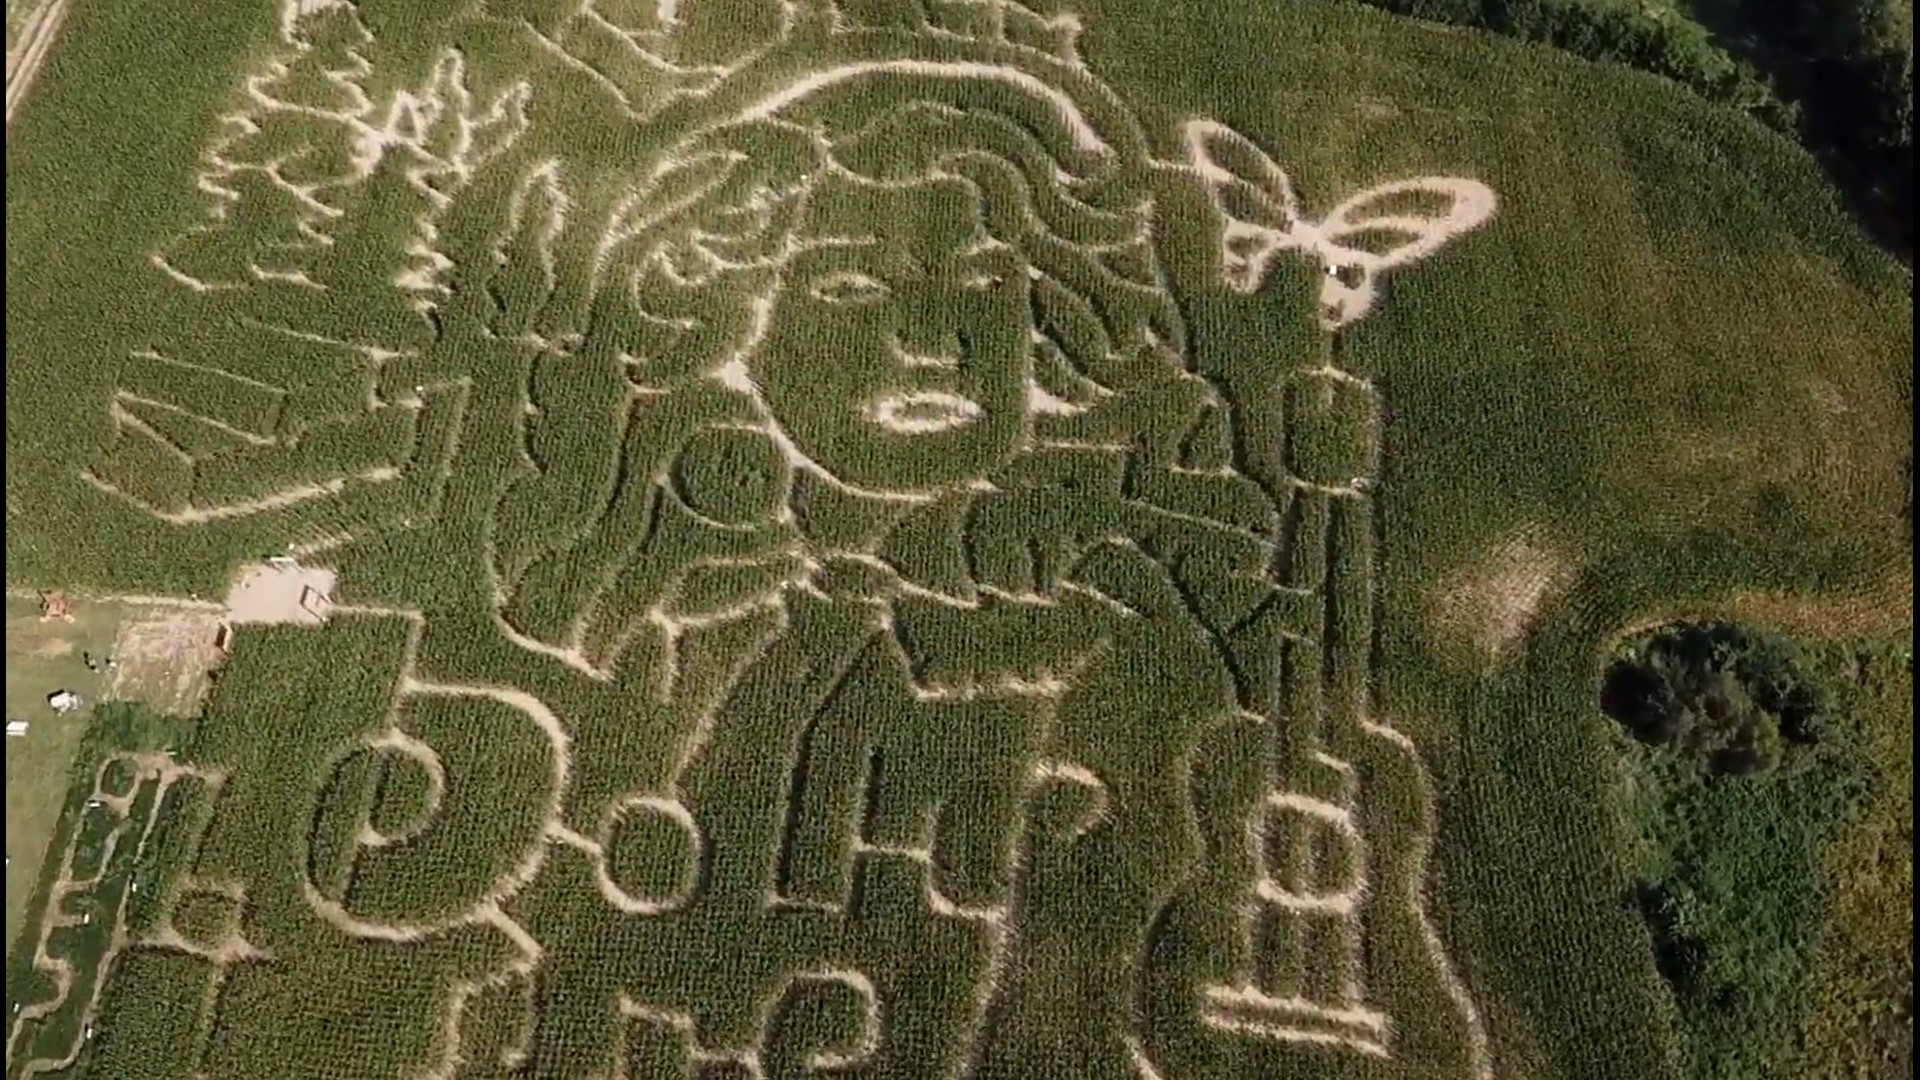 The Van Buren Acres corn maze in Hebron, Ohio will be open through Halloween. It features Dolly Parton and many of the things she is best known for.